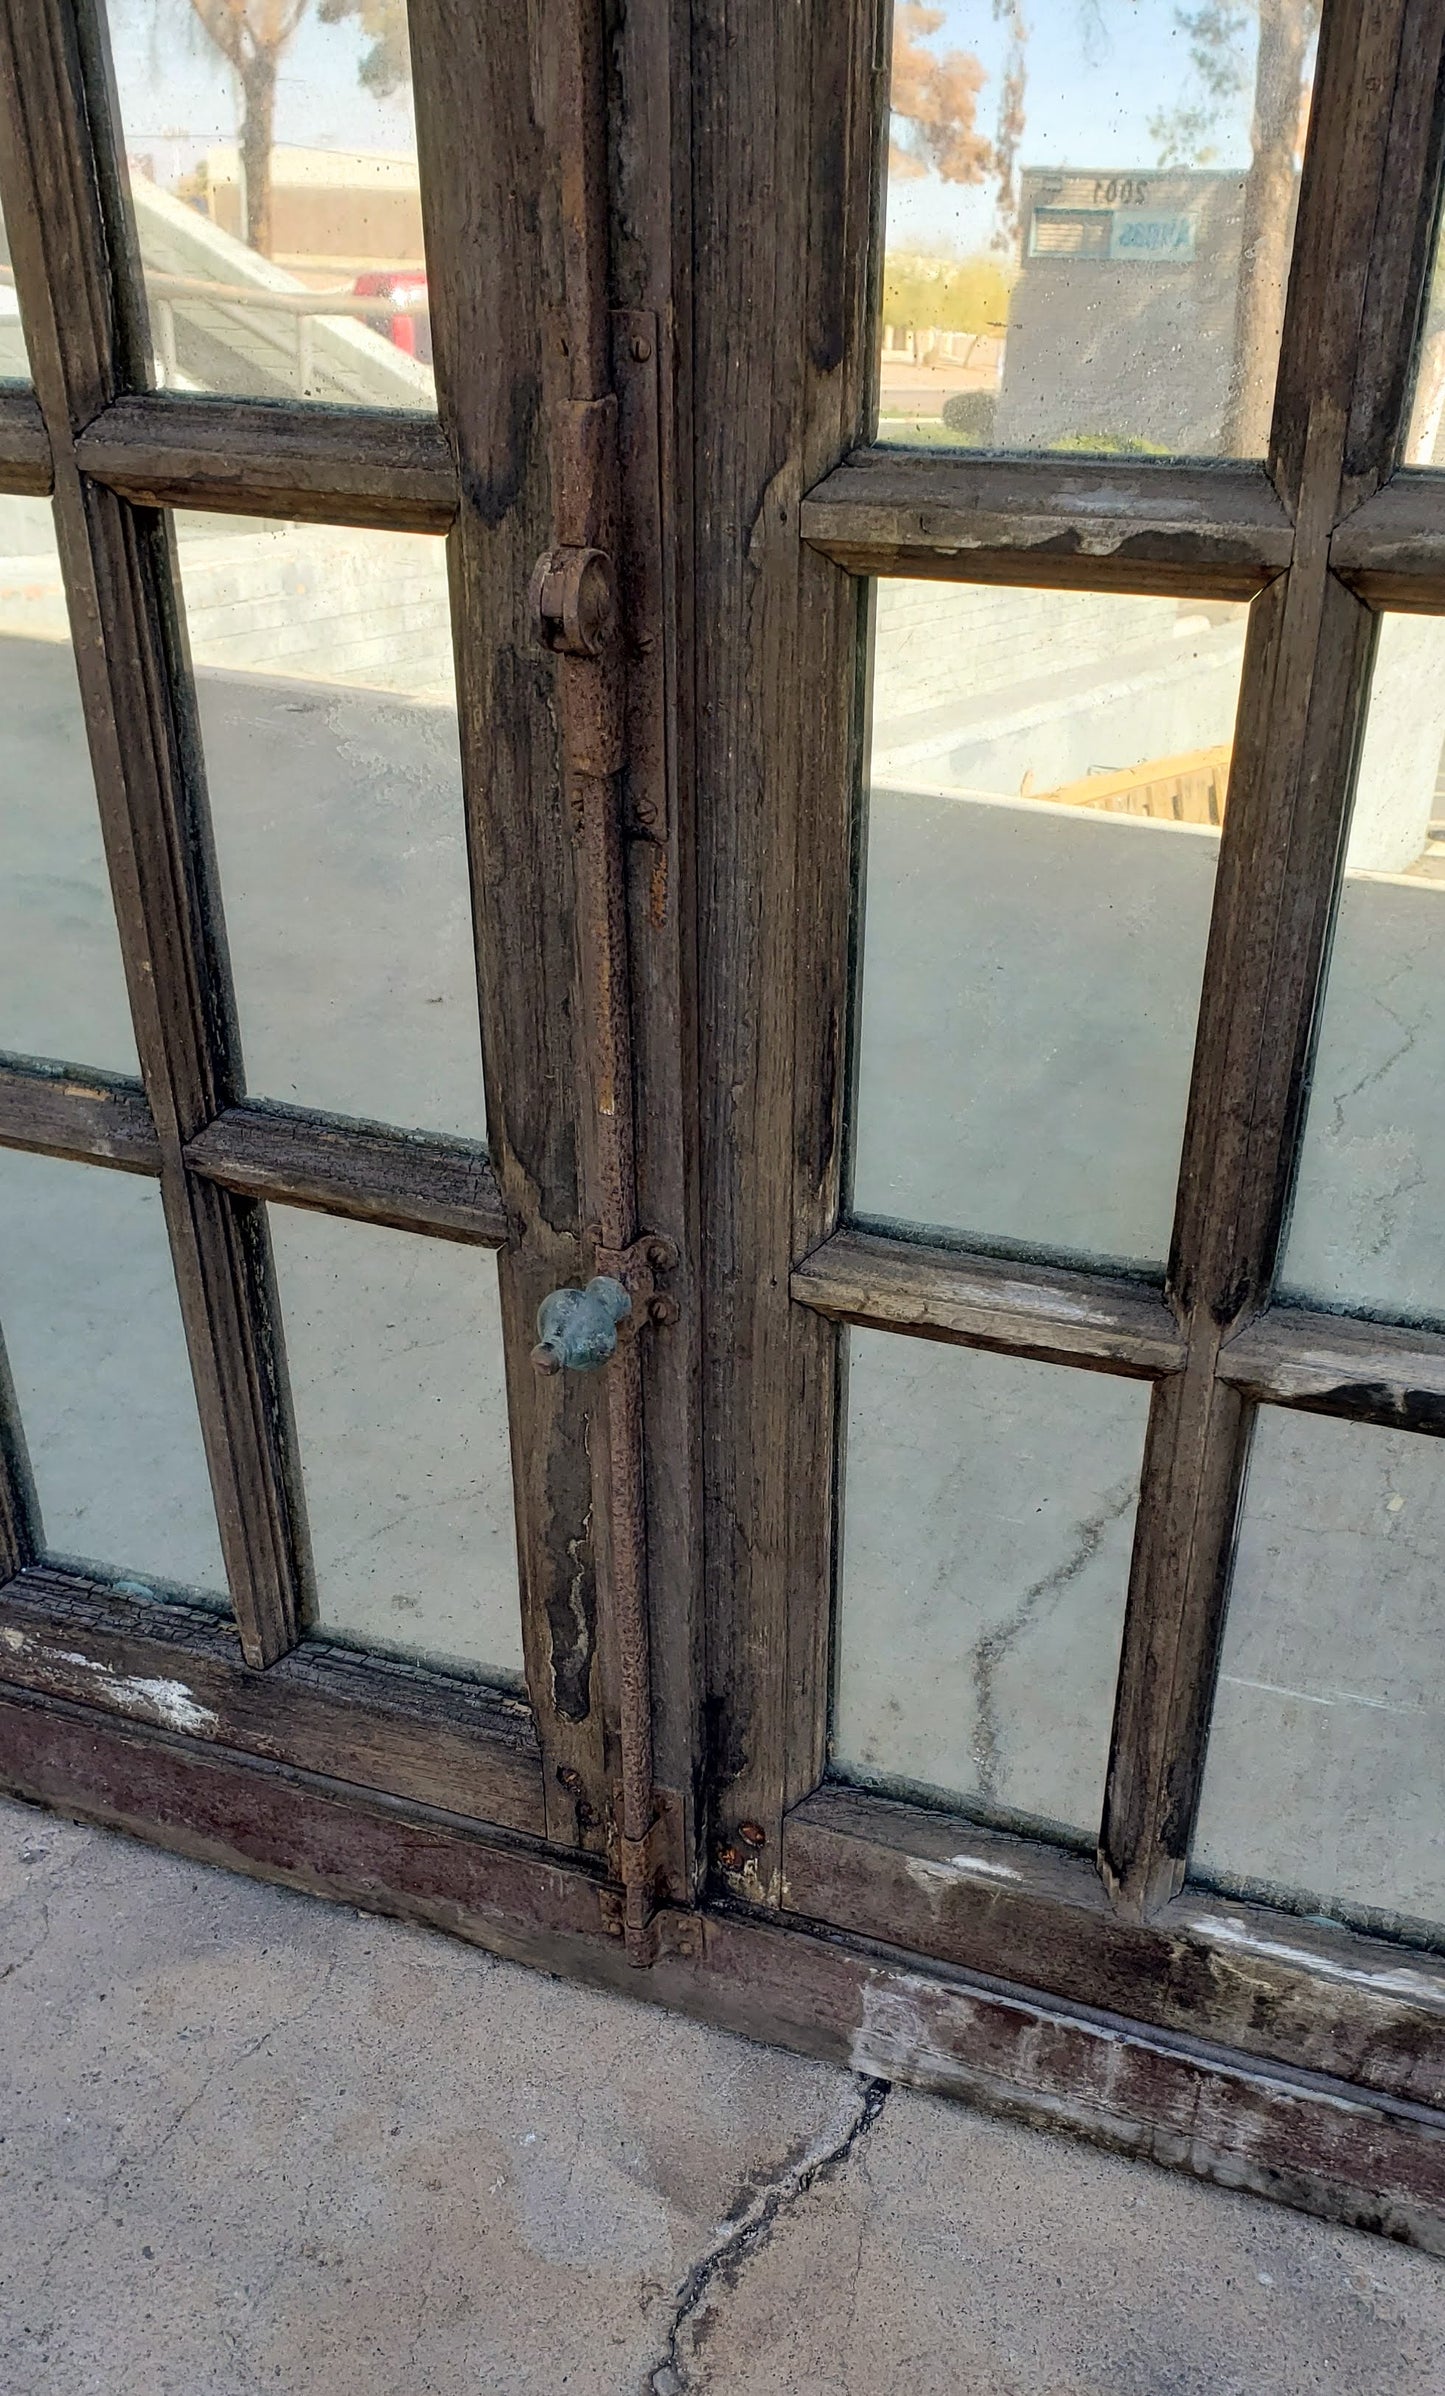 Large Antique Rectangle Mirrored Window